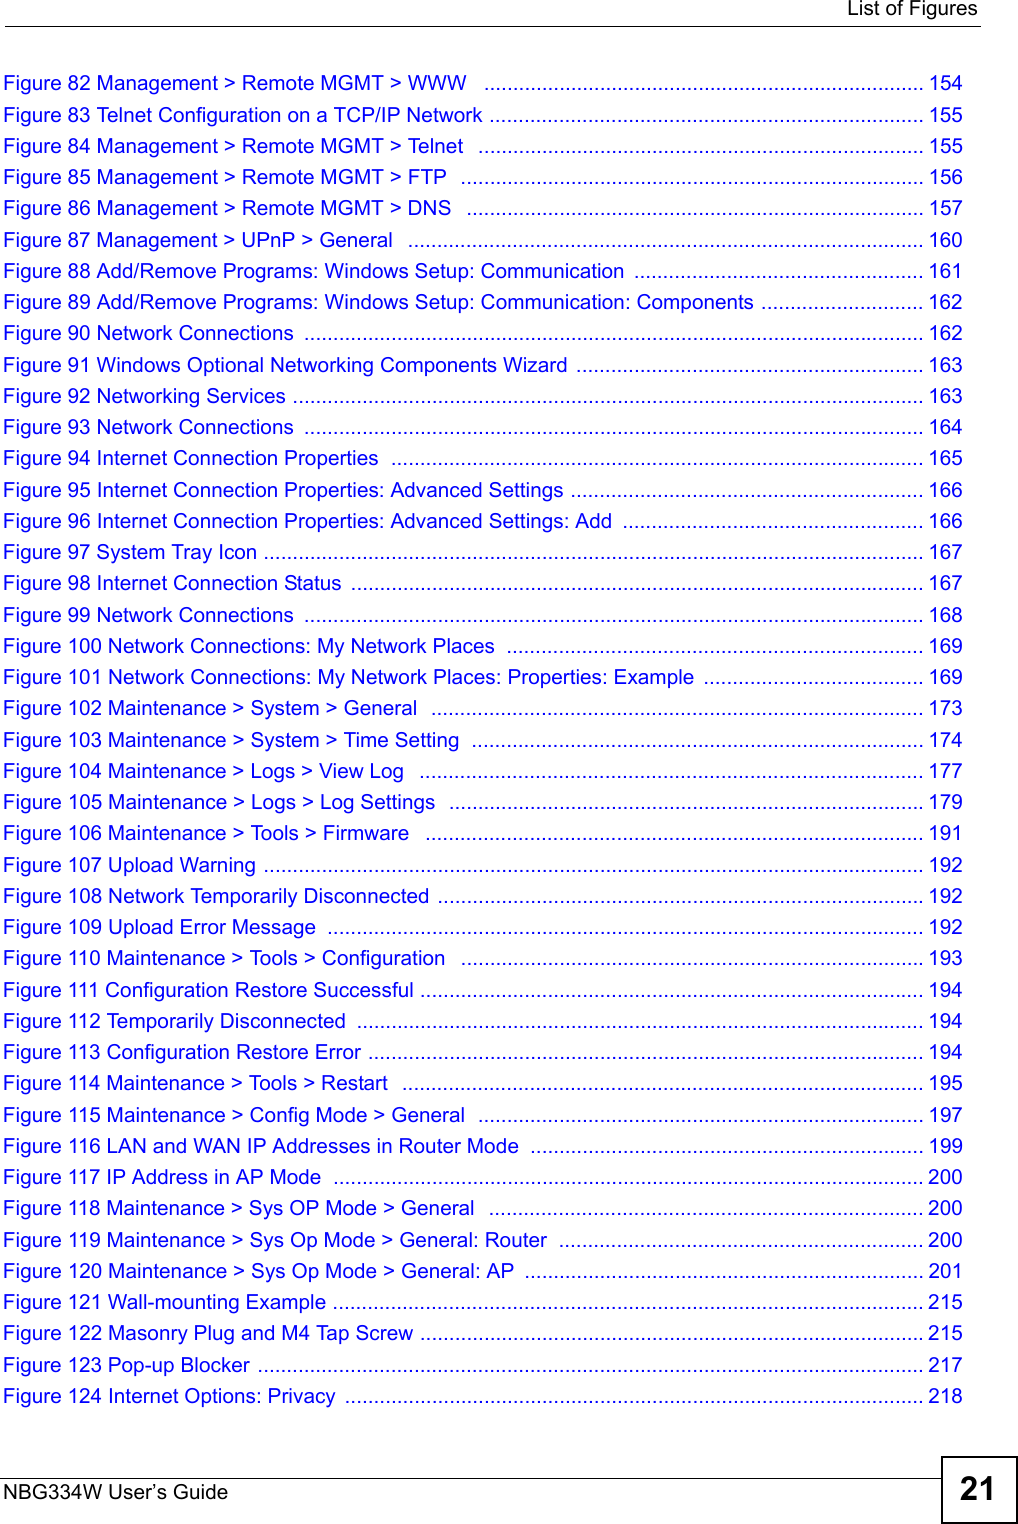  List of FiguresNBG334W User’s Guide 21Figure 82 Management &gt; Remote MGMT &gt; WWW   ............................................................................ 154Figure 83 Telnet Configuration on a TCP/IP Network ........................................................................... 155Figure 84 Management &gt; Remote MGMT &gt; Telnet   ............................................................................. 155Figure 85 Management &gt; Remote MGMT &gt; FTP  ................................................................................ 156Figure 86 Management &gt; Remote MGMT &gt; DNS   ............................................................................... 157Figure 87 Management &gt; UPnP &gt; General   .........................................................................................160Figure 88 Add/Remove Programs: Windows Setup: Communication  .................................................. 161Figure 89 Add/Remove Programs: Windows Setup: Communication: Components ............................ 162Figure 90 Network Connections  ........................................................................................................... 162Figure 91 Windows Optional Networking Components Wizard ............................................................ 163Figure 92 Networking Services ............................................................................................................. 163Figure 93 Network Connections  ........................................................................................................... 164Figure 94 Internet Connection Properties  ............................................................................................ 165Figure 95 Internet Connection Properties: Advanced Settings ............................................................. 166Figure 96 Internet Connection Properties: Advanced Settings: Add  .................................................... 166Figure 97 System Tray Icon .................................................................................................................. 167Figure 98 Internet Connection Status ................................................................................................... 167Figure 99 Network Connections  ........................................................................................................... 168Figure 100 Network Connections: My Network Places  ........................................................................ 169Figure 101 Network Connections: My Network Places: Properties: Example  ...................................... 169Figure 102 Maintenance &gt; System &gt; General  .....................................................................................173Figure 103 Maintenance &gt; System &gt; Time Setting  .............................................................................. 174Figure 104 Maintenance &gt; Logs &gt; View Log   ....................................................................................... 177Figure 105 Maintenance &gt; Logs &gt; Log Settings  ..................................................................................179Figure 106 Maintenance &gt; Tools &gt; Firmware   ...................................................................................... 191Figure 107 Upload Warning .................................................................................................................. 192Figure 108 Network Temporarily Disconnected ....................................................................................192Figure 109 Upload Error Message  ....................................................................................................... 192Figure 110 Maintenance &gt; Tools &gt; Configuration   ................................................................................193Figure 111 Configuration Restore Successful ....................................................................................... 194Figure 112 Temporarily Disconnected .................................................................................................. 194Figure 113 Configuration Restore Error ................................................................................................ 194Figure 114 Maintenance &gt; Tools &gt; Restart  .......................................................................................... 195Figure 115 Maintenance &gt; Config Mode &gt; General  ............................................................................. 197Figure 116 LAN and WAN IP Addresses in Router Mode .................................................................... 199Figure 117 IP Address in AP Mode  ...................................................................................................... 200Figure 118 Maintenance &gt; Sys OP Mode &gt; General  ........................................................................... 200Figure 119 Maintenance &gt; Sys Op Mode &gt; General: Router  ............................................................... 200Figure 120 Maintenance &gt; Sys Op Mode &gt; General: AP  ..................................................................... 201Figure 121 Wall-mounting Example ...................................................................................................... 215Figure 122 Masonry Plug and M4 Tap Screw .......................................................................................215Figure 123 Pop-up Blocker ................................................................................................................... 217Figure 124 Internet Options: Privacy  .................................................................................................... 218